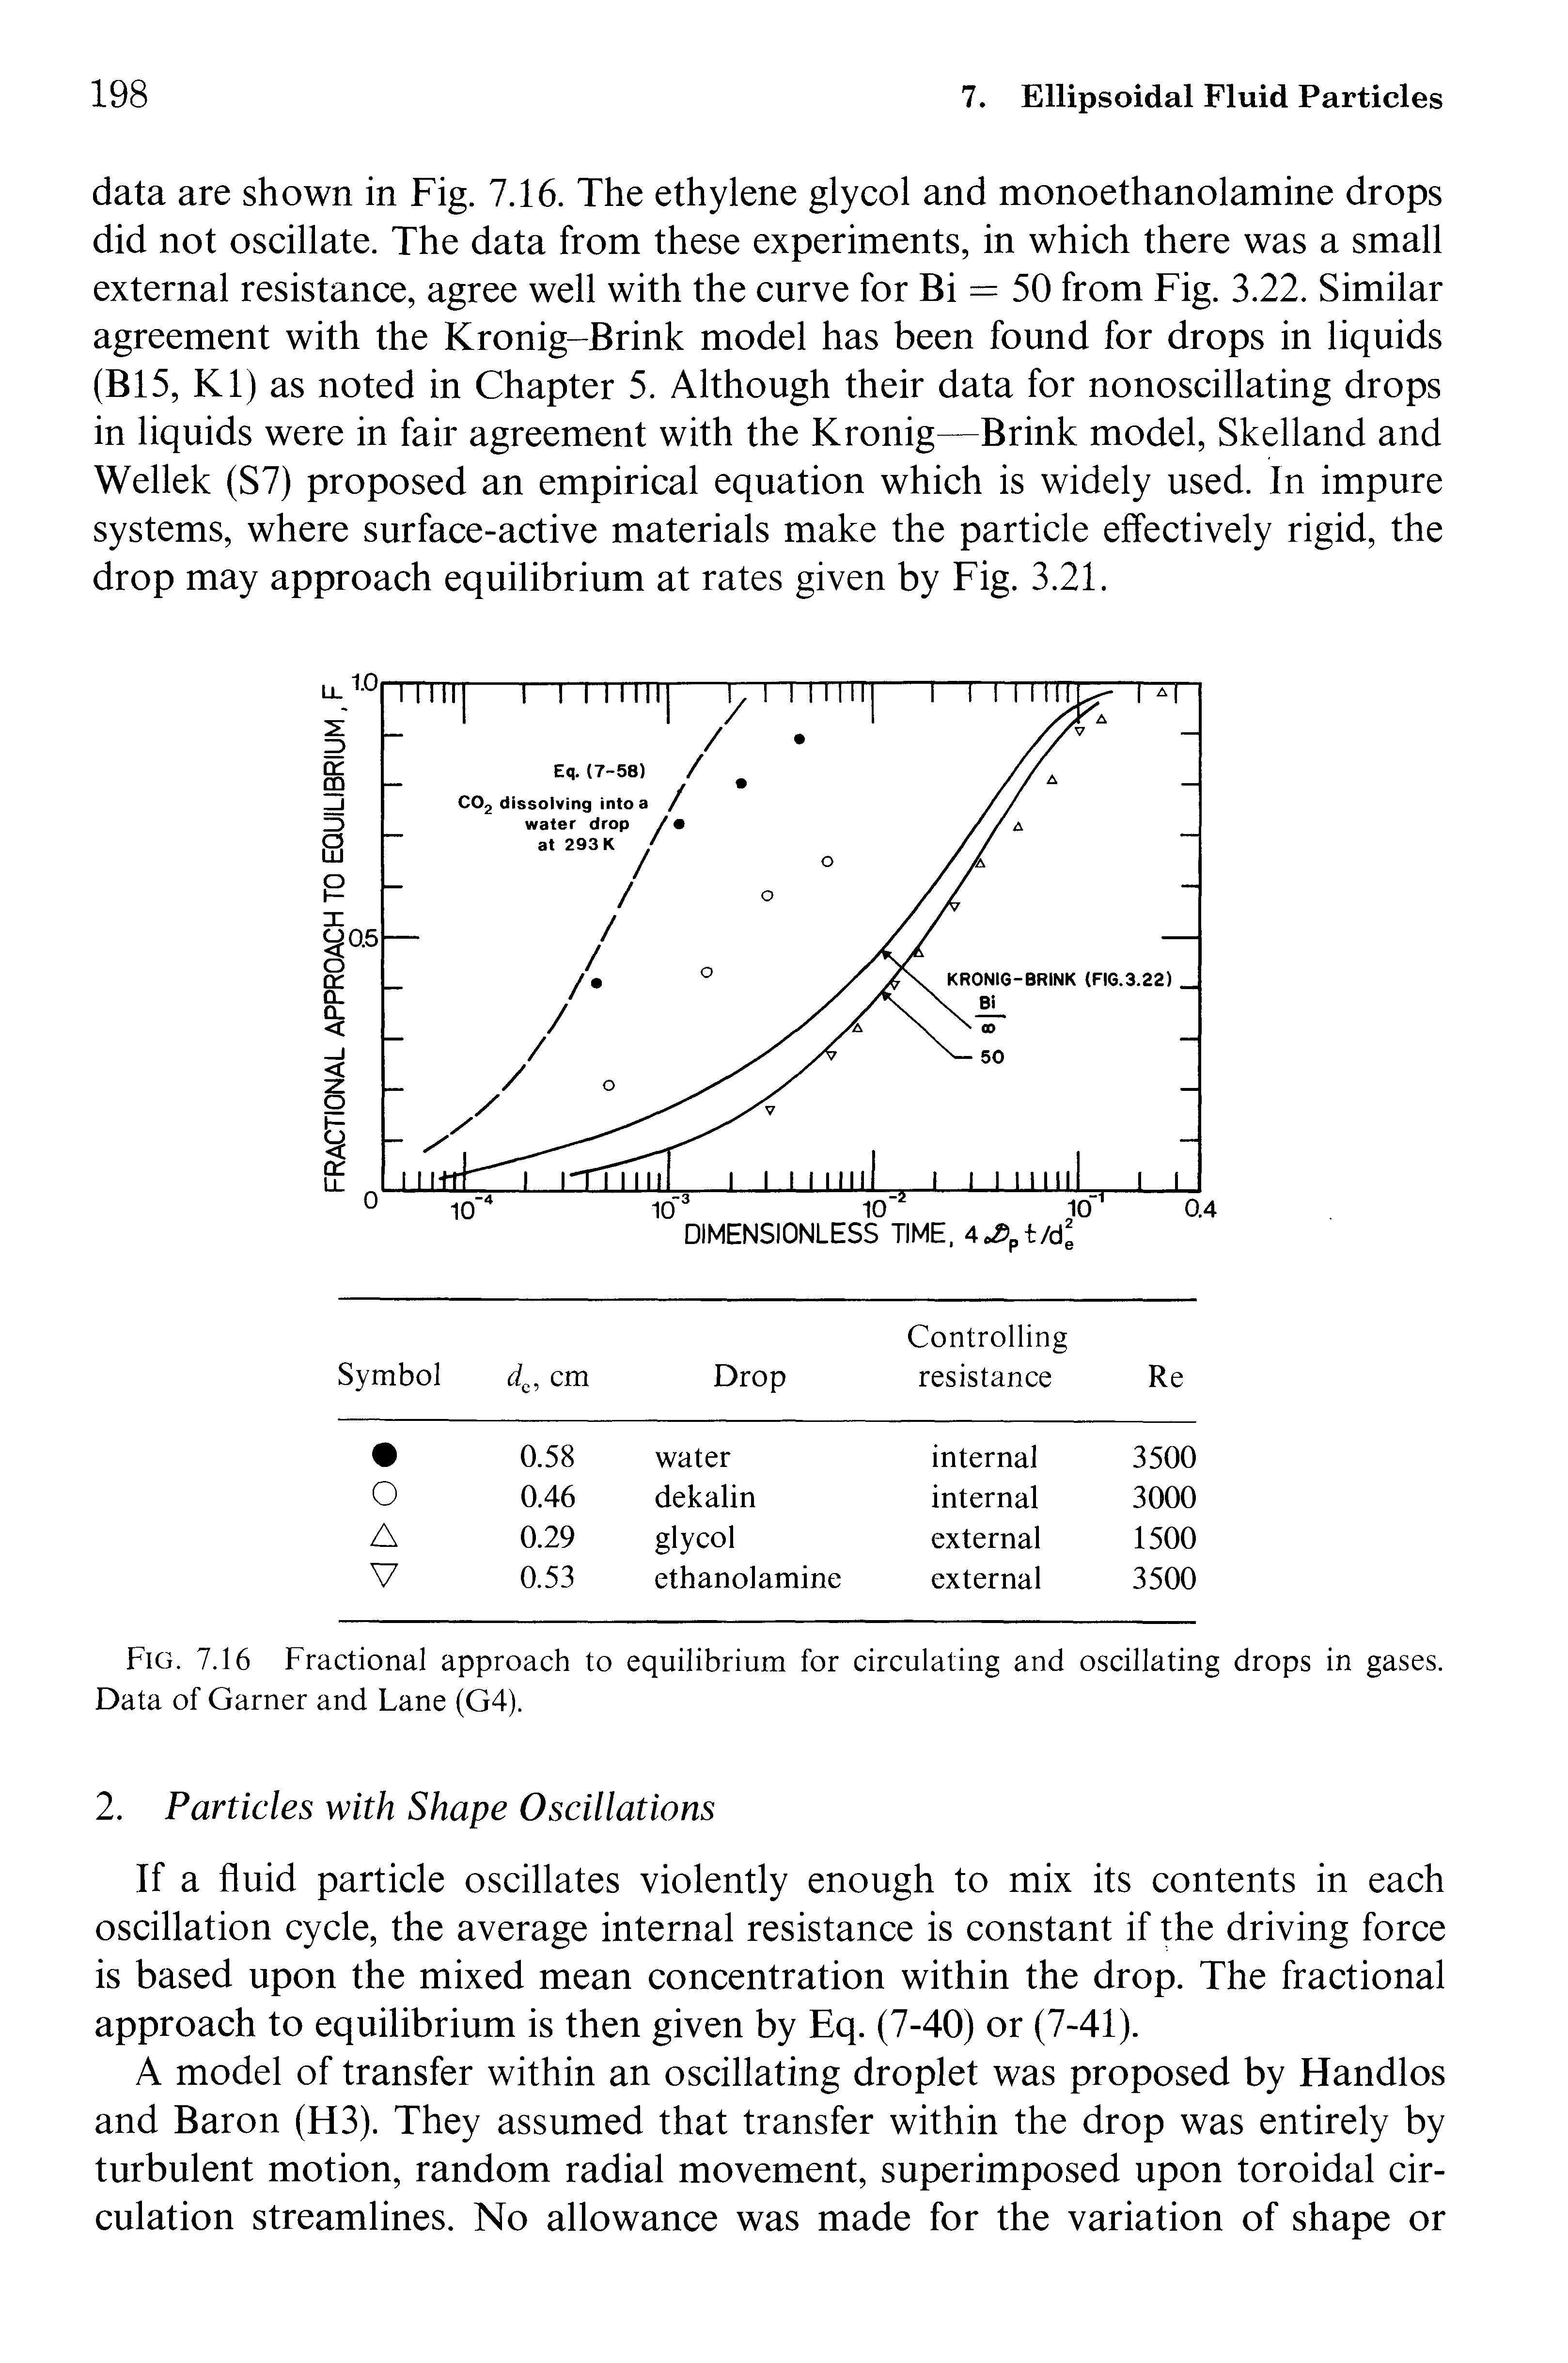 Fig. 7.16 Fractional approach to equilibrium for circulating and oscillating drops in gases. Data of Garner and Lane (G4).